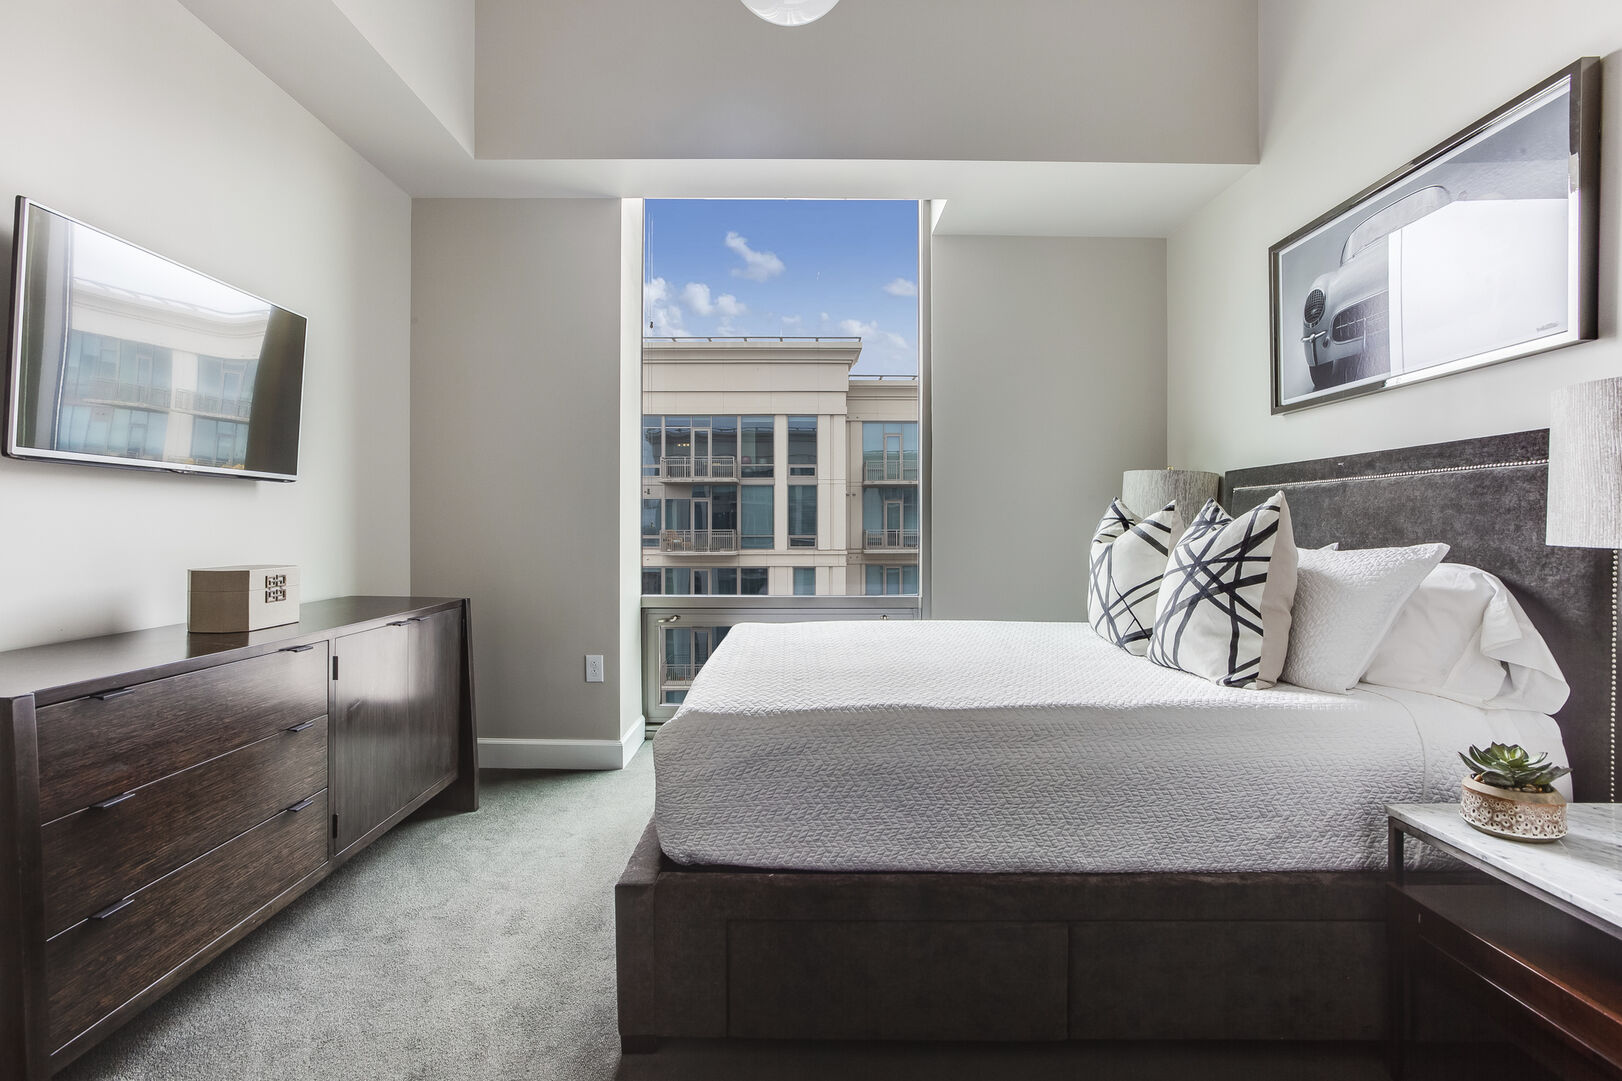 This Atlanta Vacation Rental has a bedroom with wall mounted TV and large window